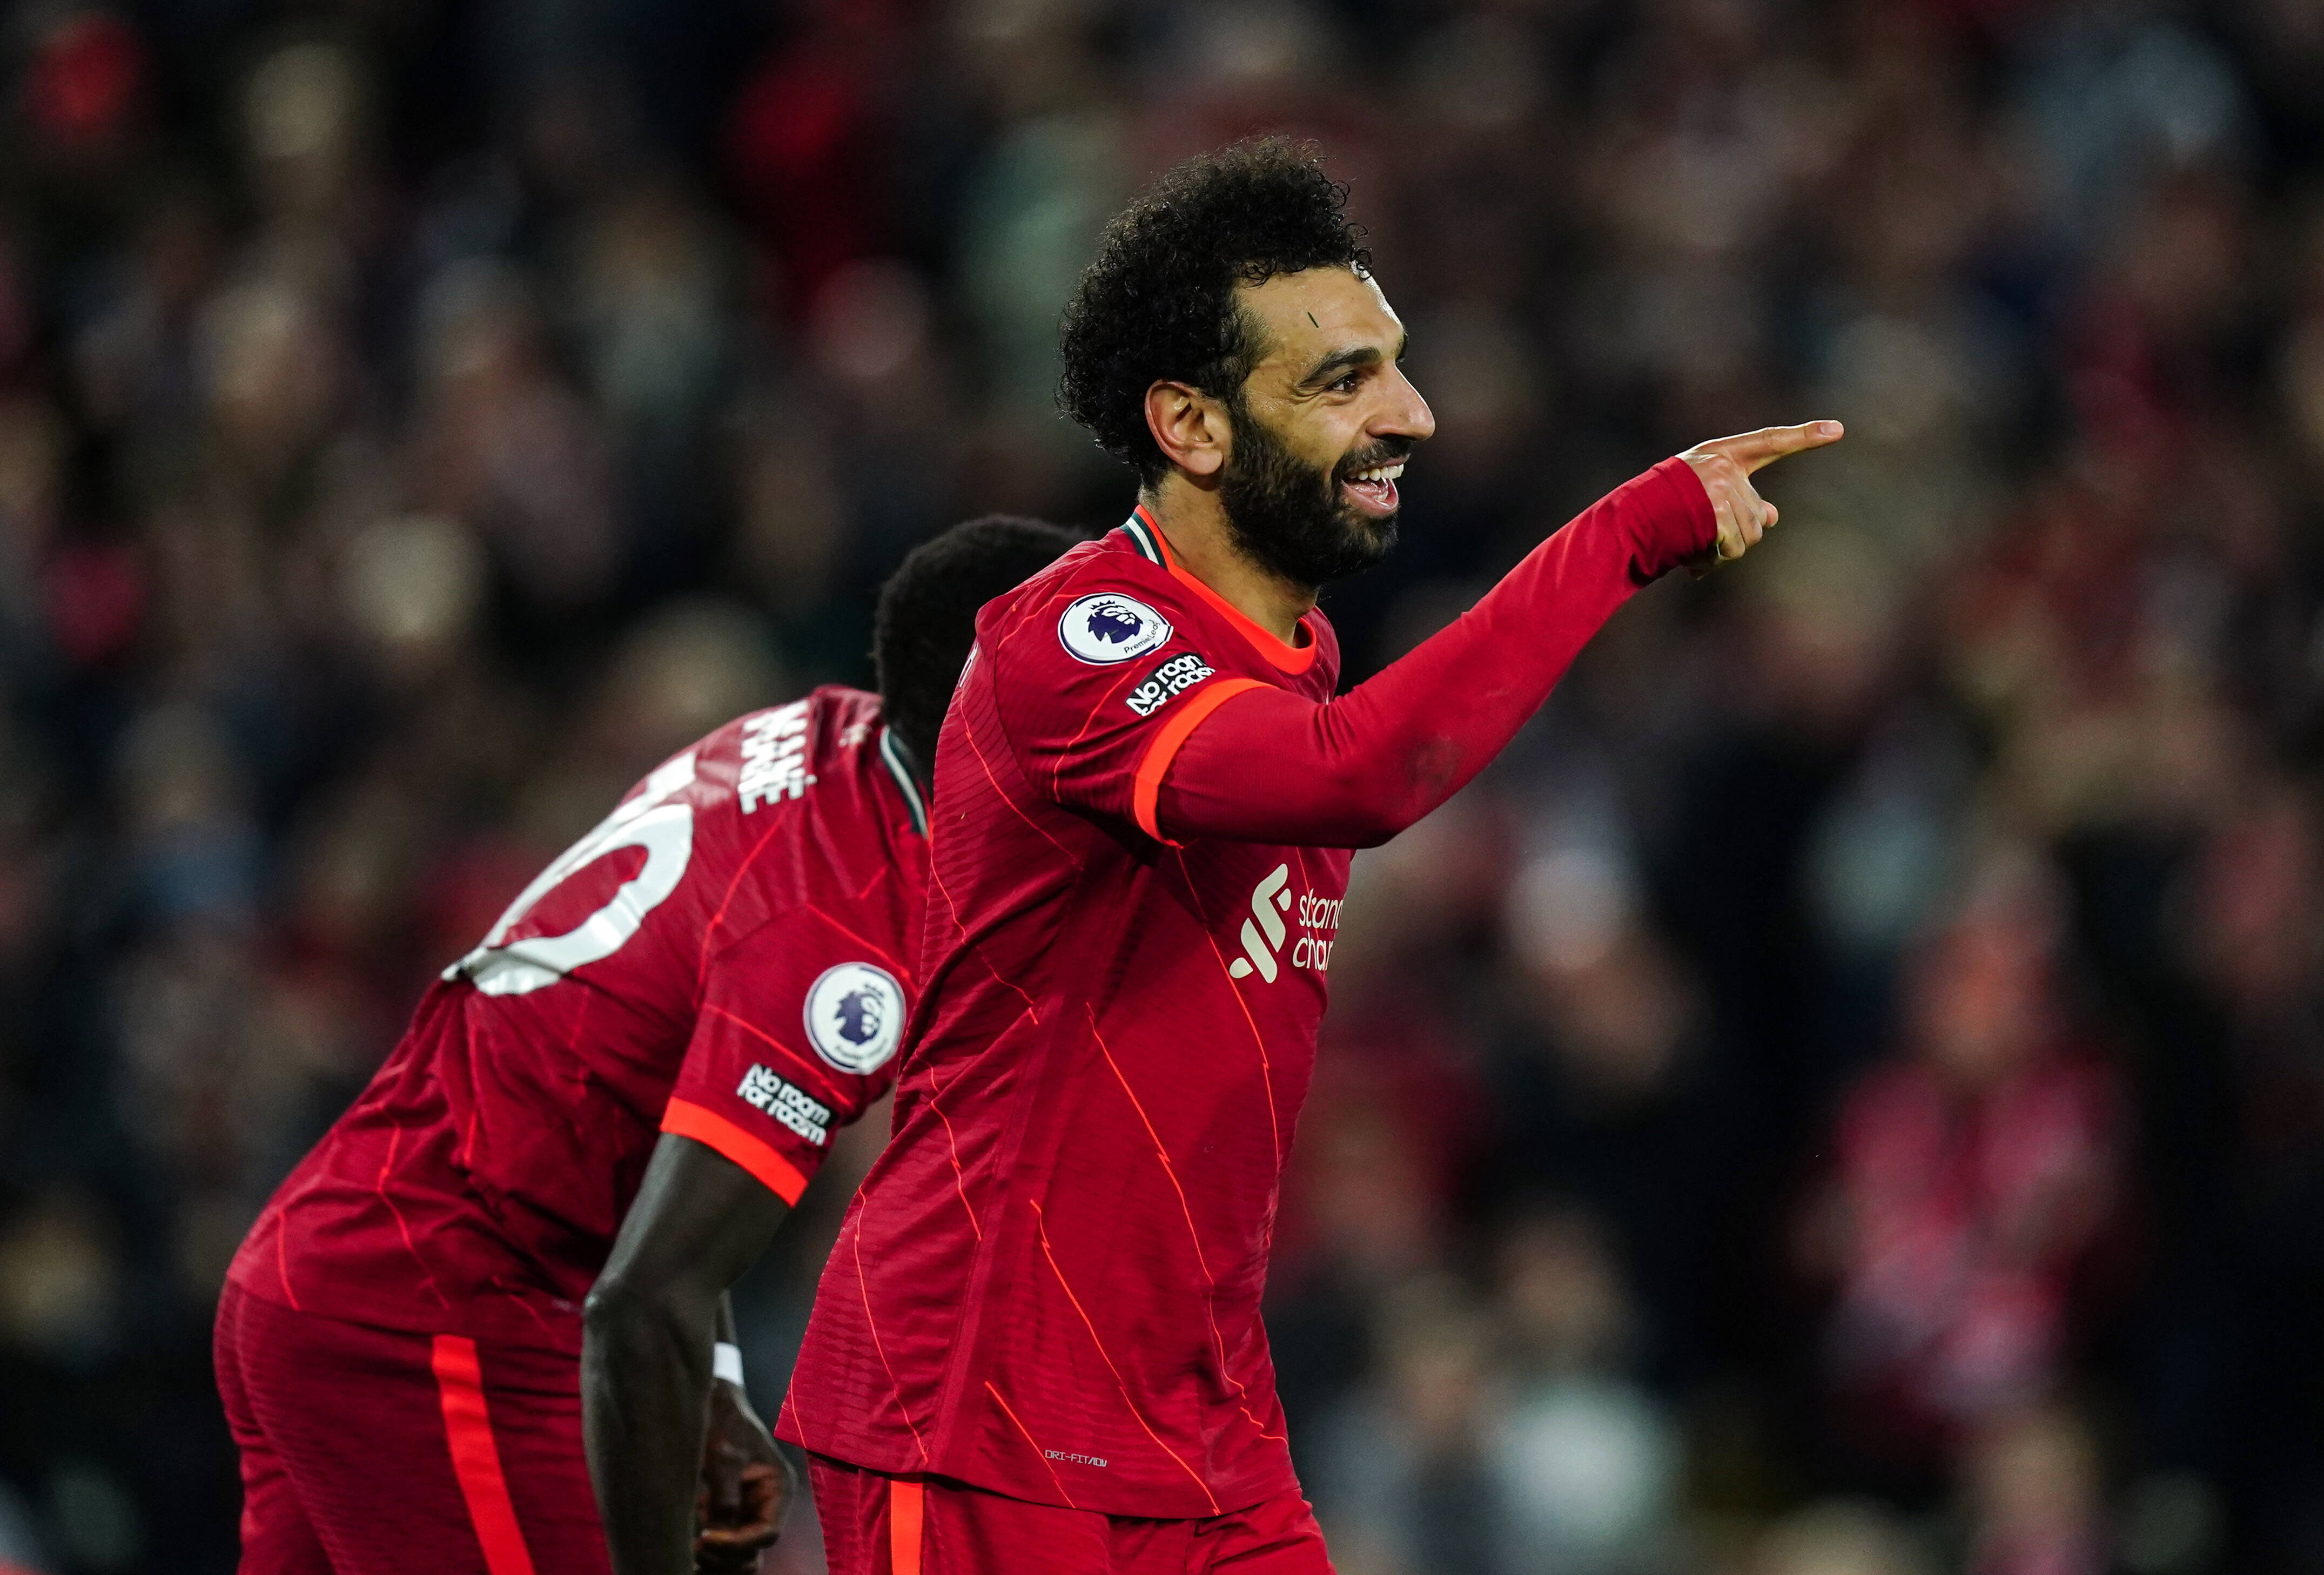 A 29-year-old Salah was among the scorers as Liverpool recently thrashed Manchester United 4-0 at Anfield.